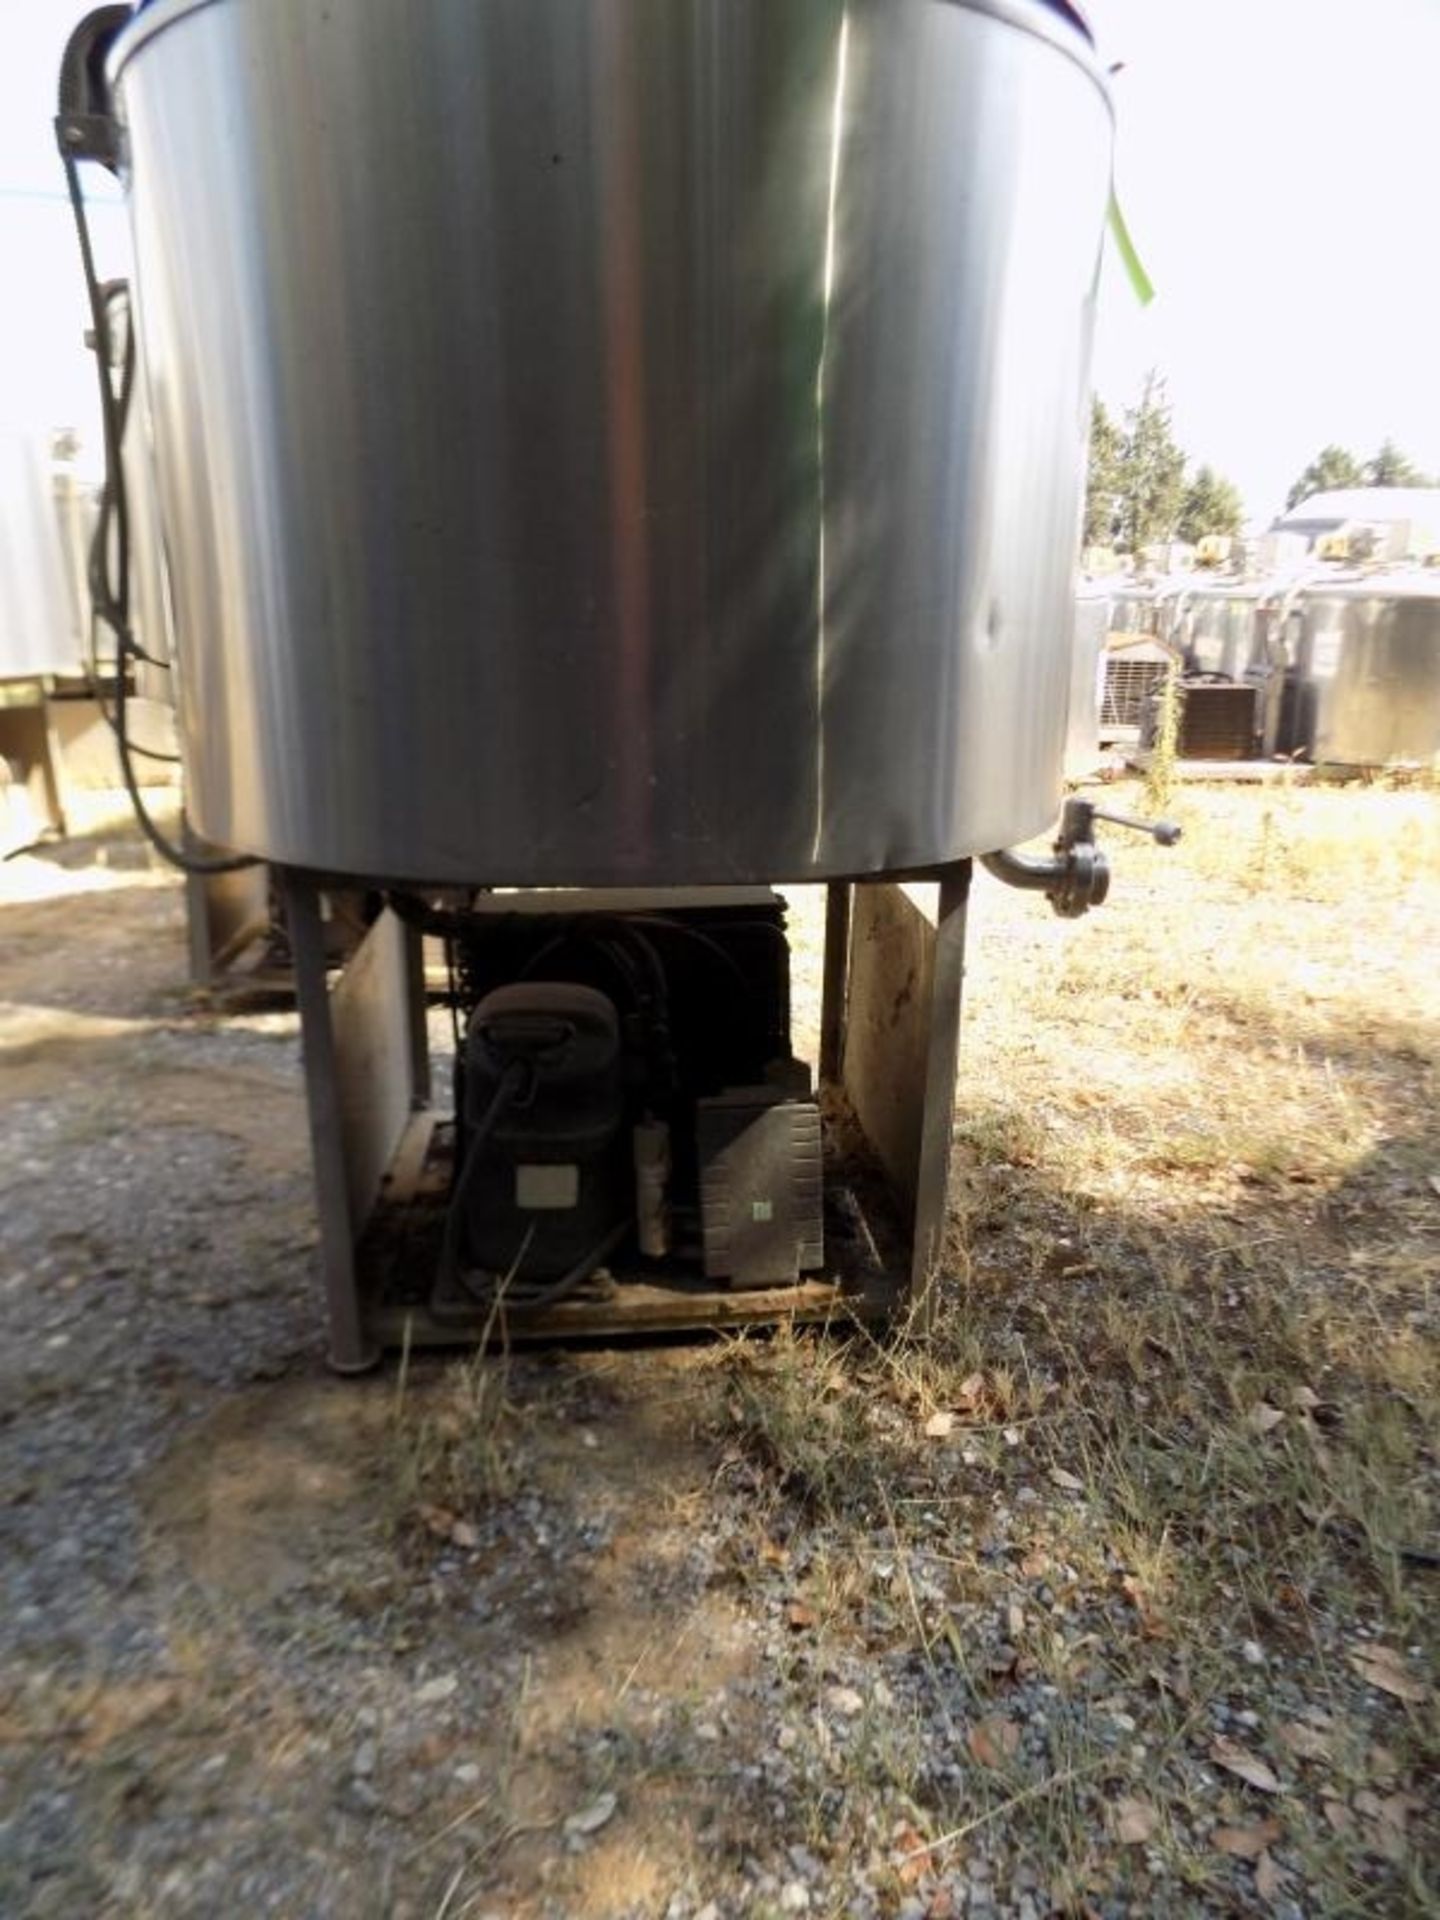 Ermicon (Packo) Aprox. 300 L/79 Gal. Jacketed S/S Farm Tank with Hinged Lid, Twin Blade Prop Motor - Image 4 of 4